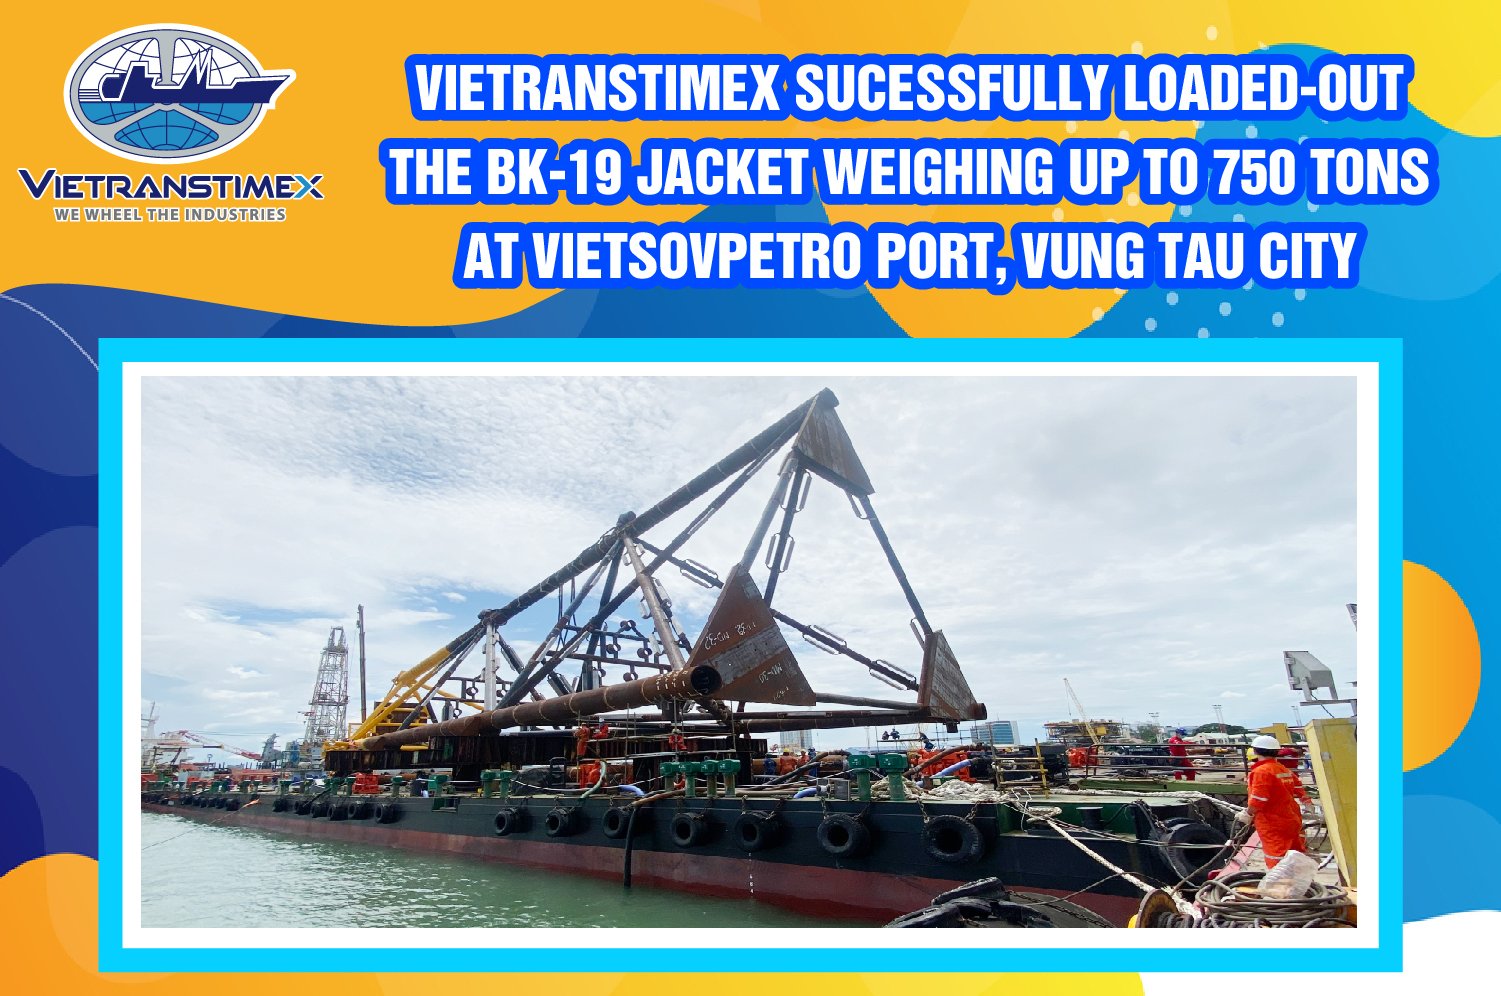 Vietranstimex Sucessfully Loaded-Out The BK18A Jacket Weighing Up To 550 Tons At Vietsovpetro Port, Vung Tau City